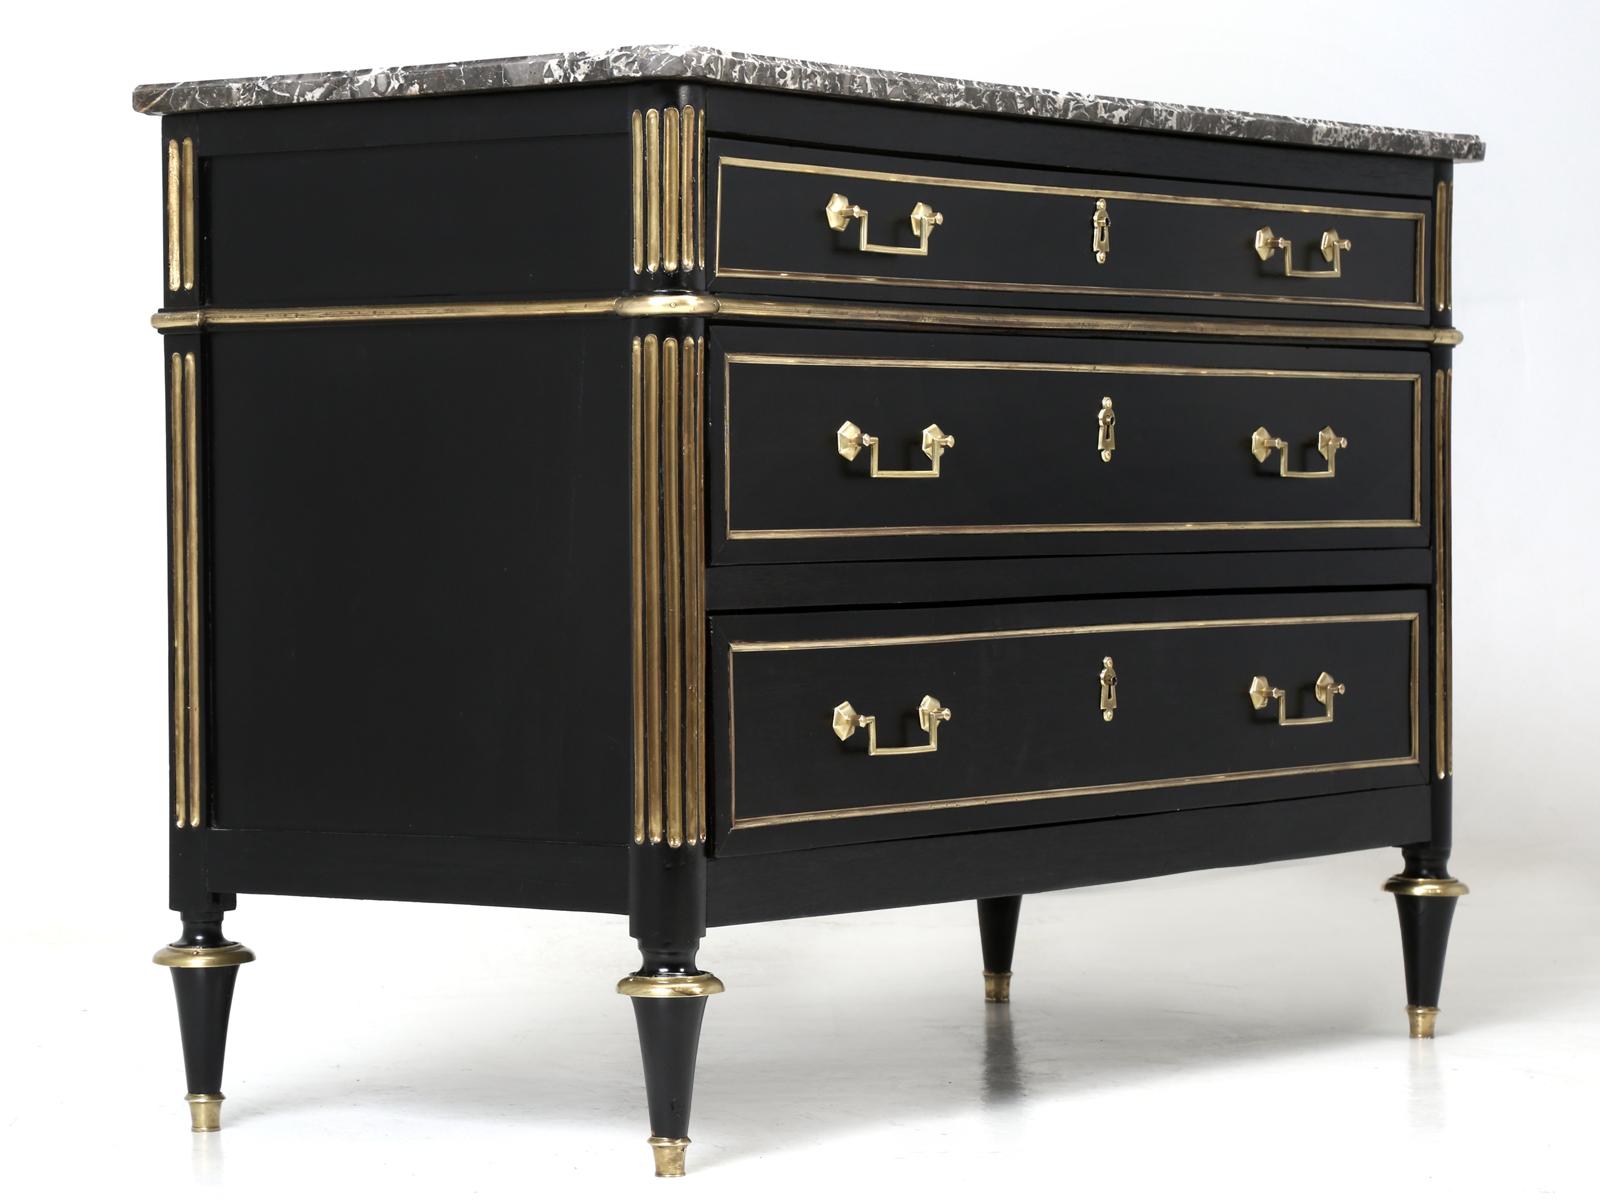 Antique French ebonized Louis XVI style commode, with a spectacular looking marble top. Our old plank in-house restoration department completely stripped this antique French Louis XVI style commode to the bare wood and removed all the brass trim